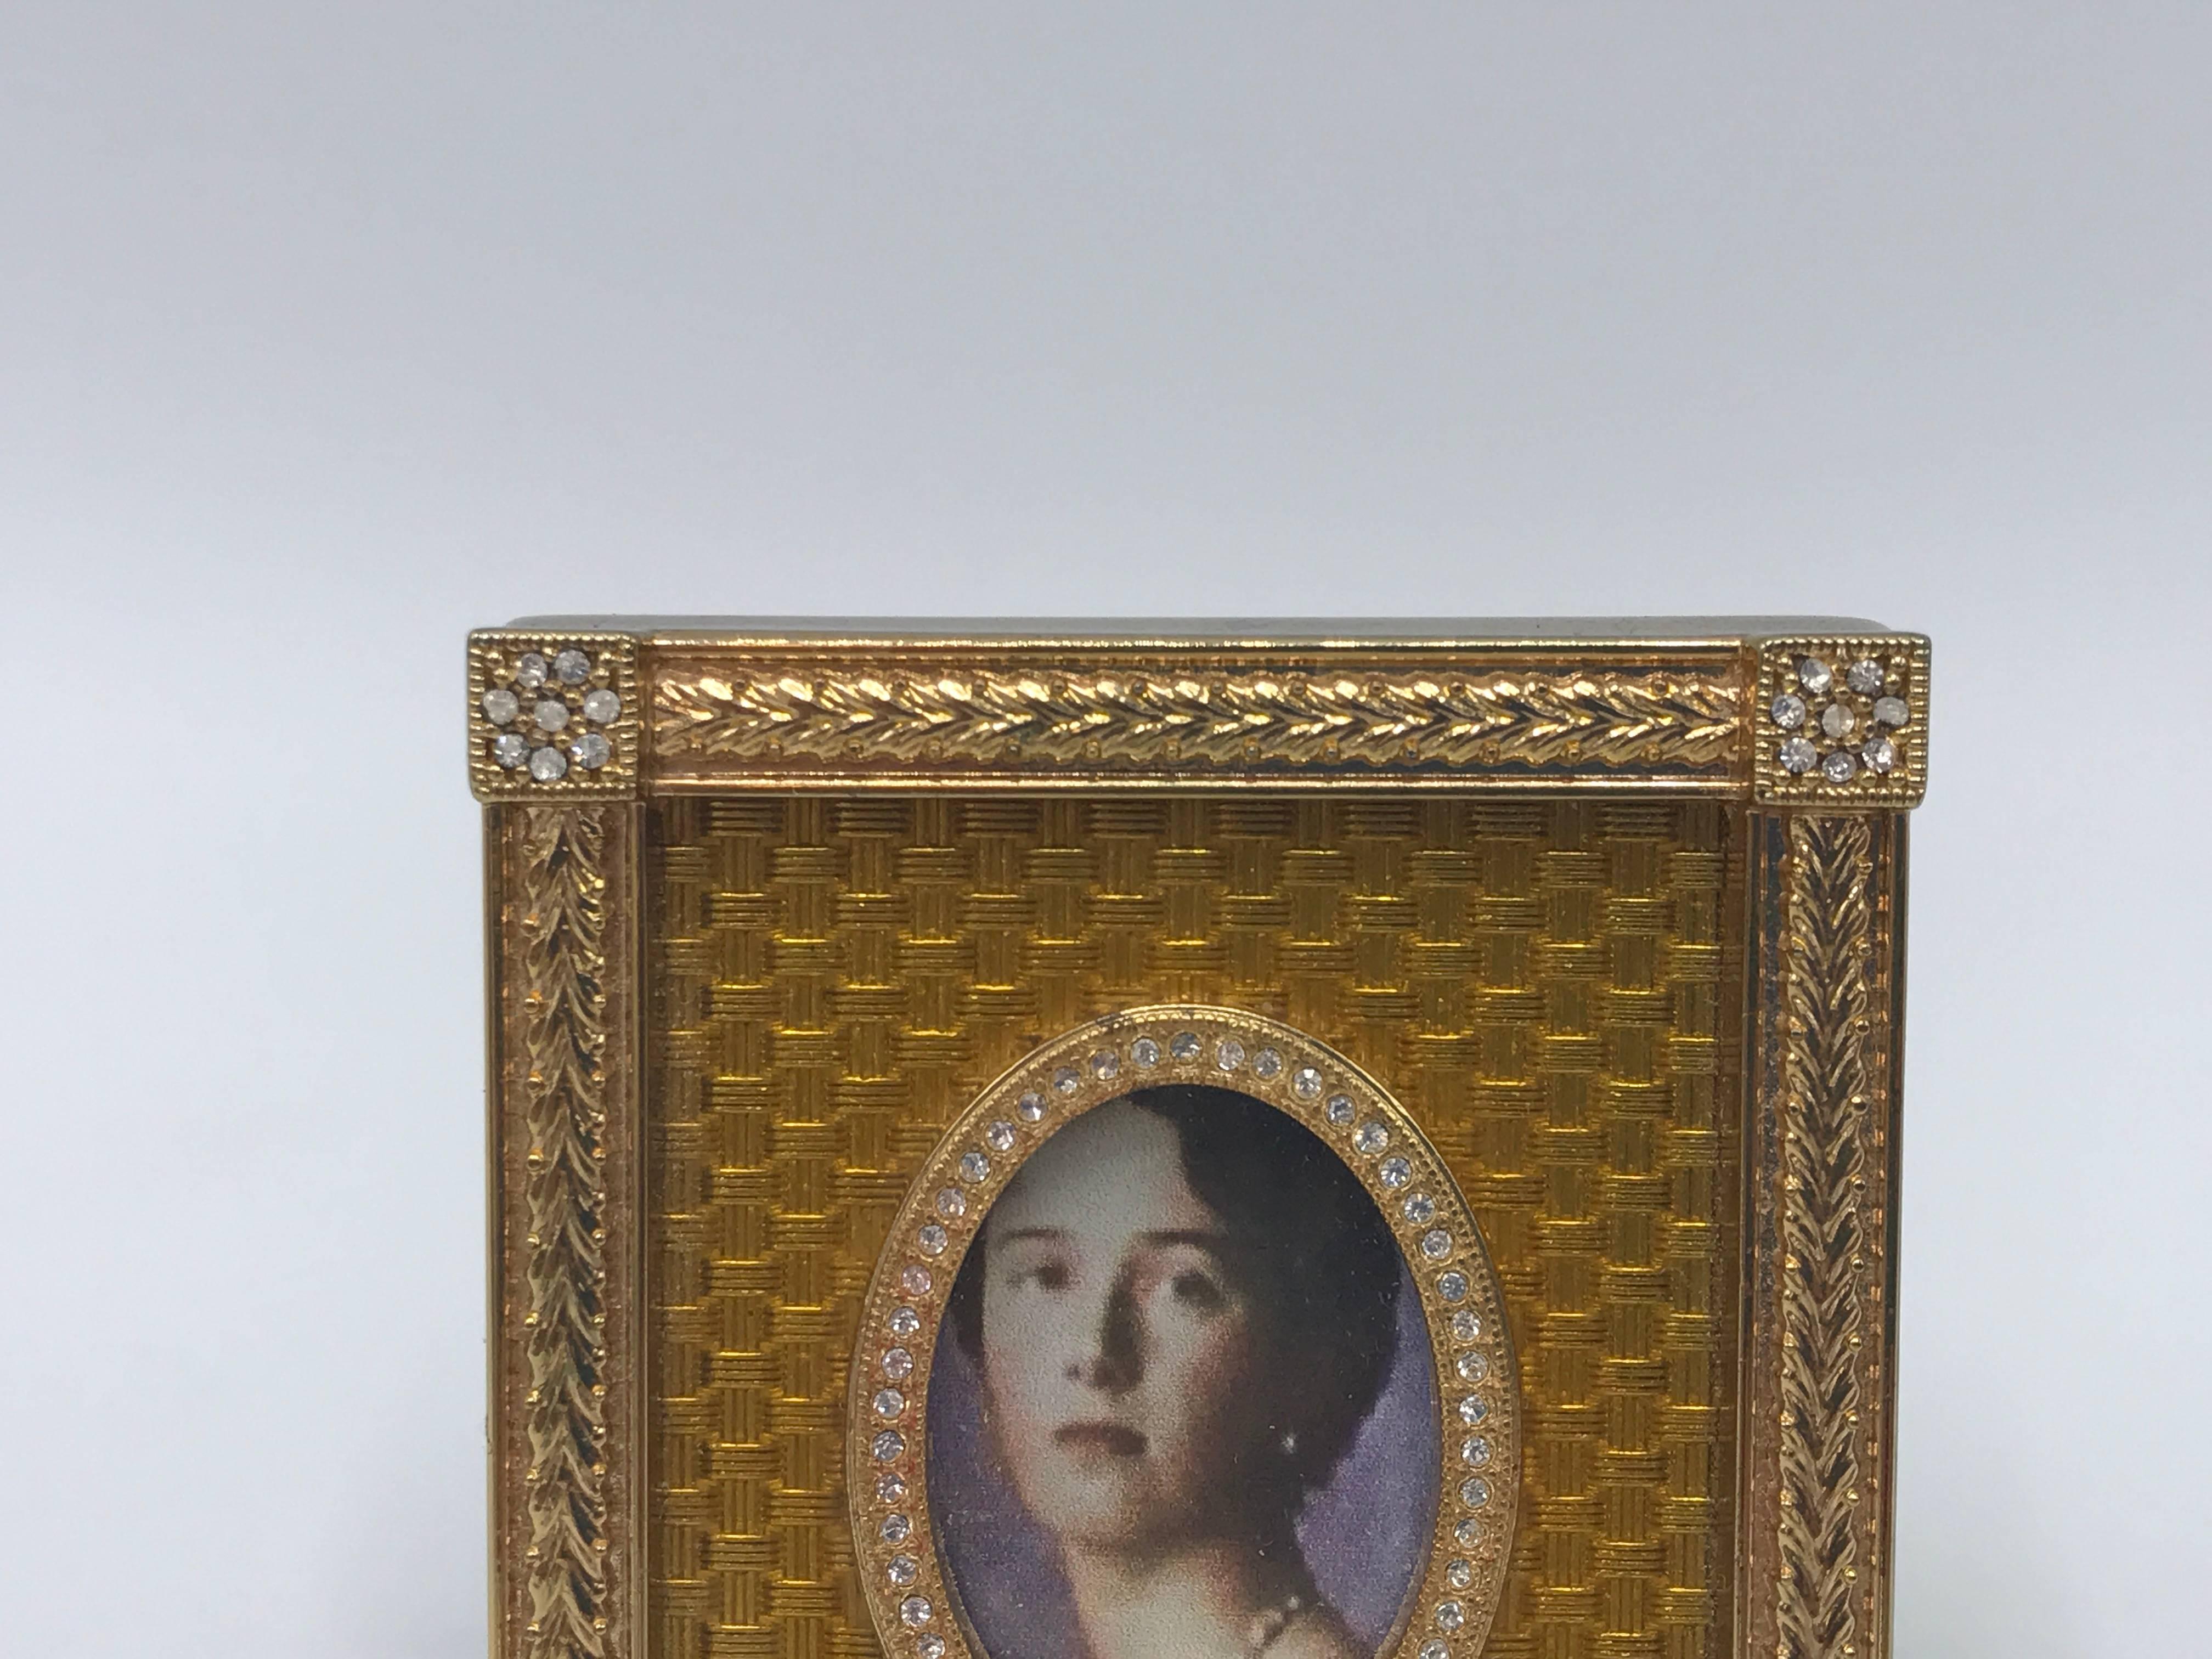 Offered is an absolutely stunning, Faberge yellow 'Catherine Palace' style picture frame from a limited edition release in the early 1990s. A miniature frame matted in a basket weave enamel guilloché pattern, enclosed by an outer laurel-leaf design